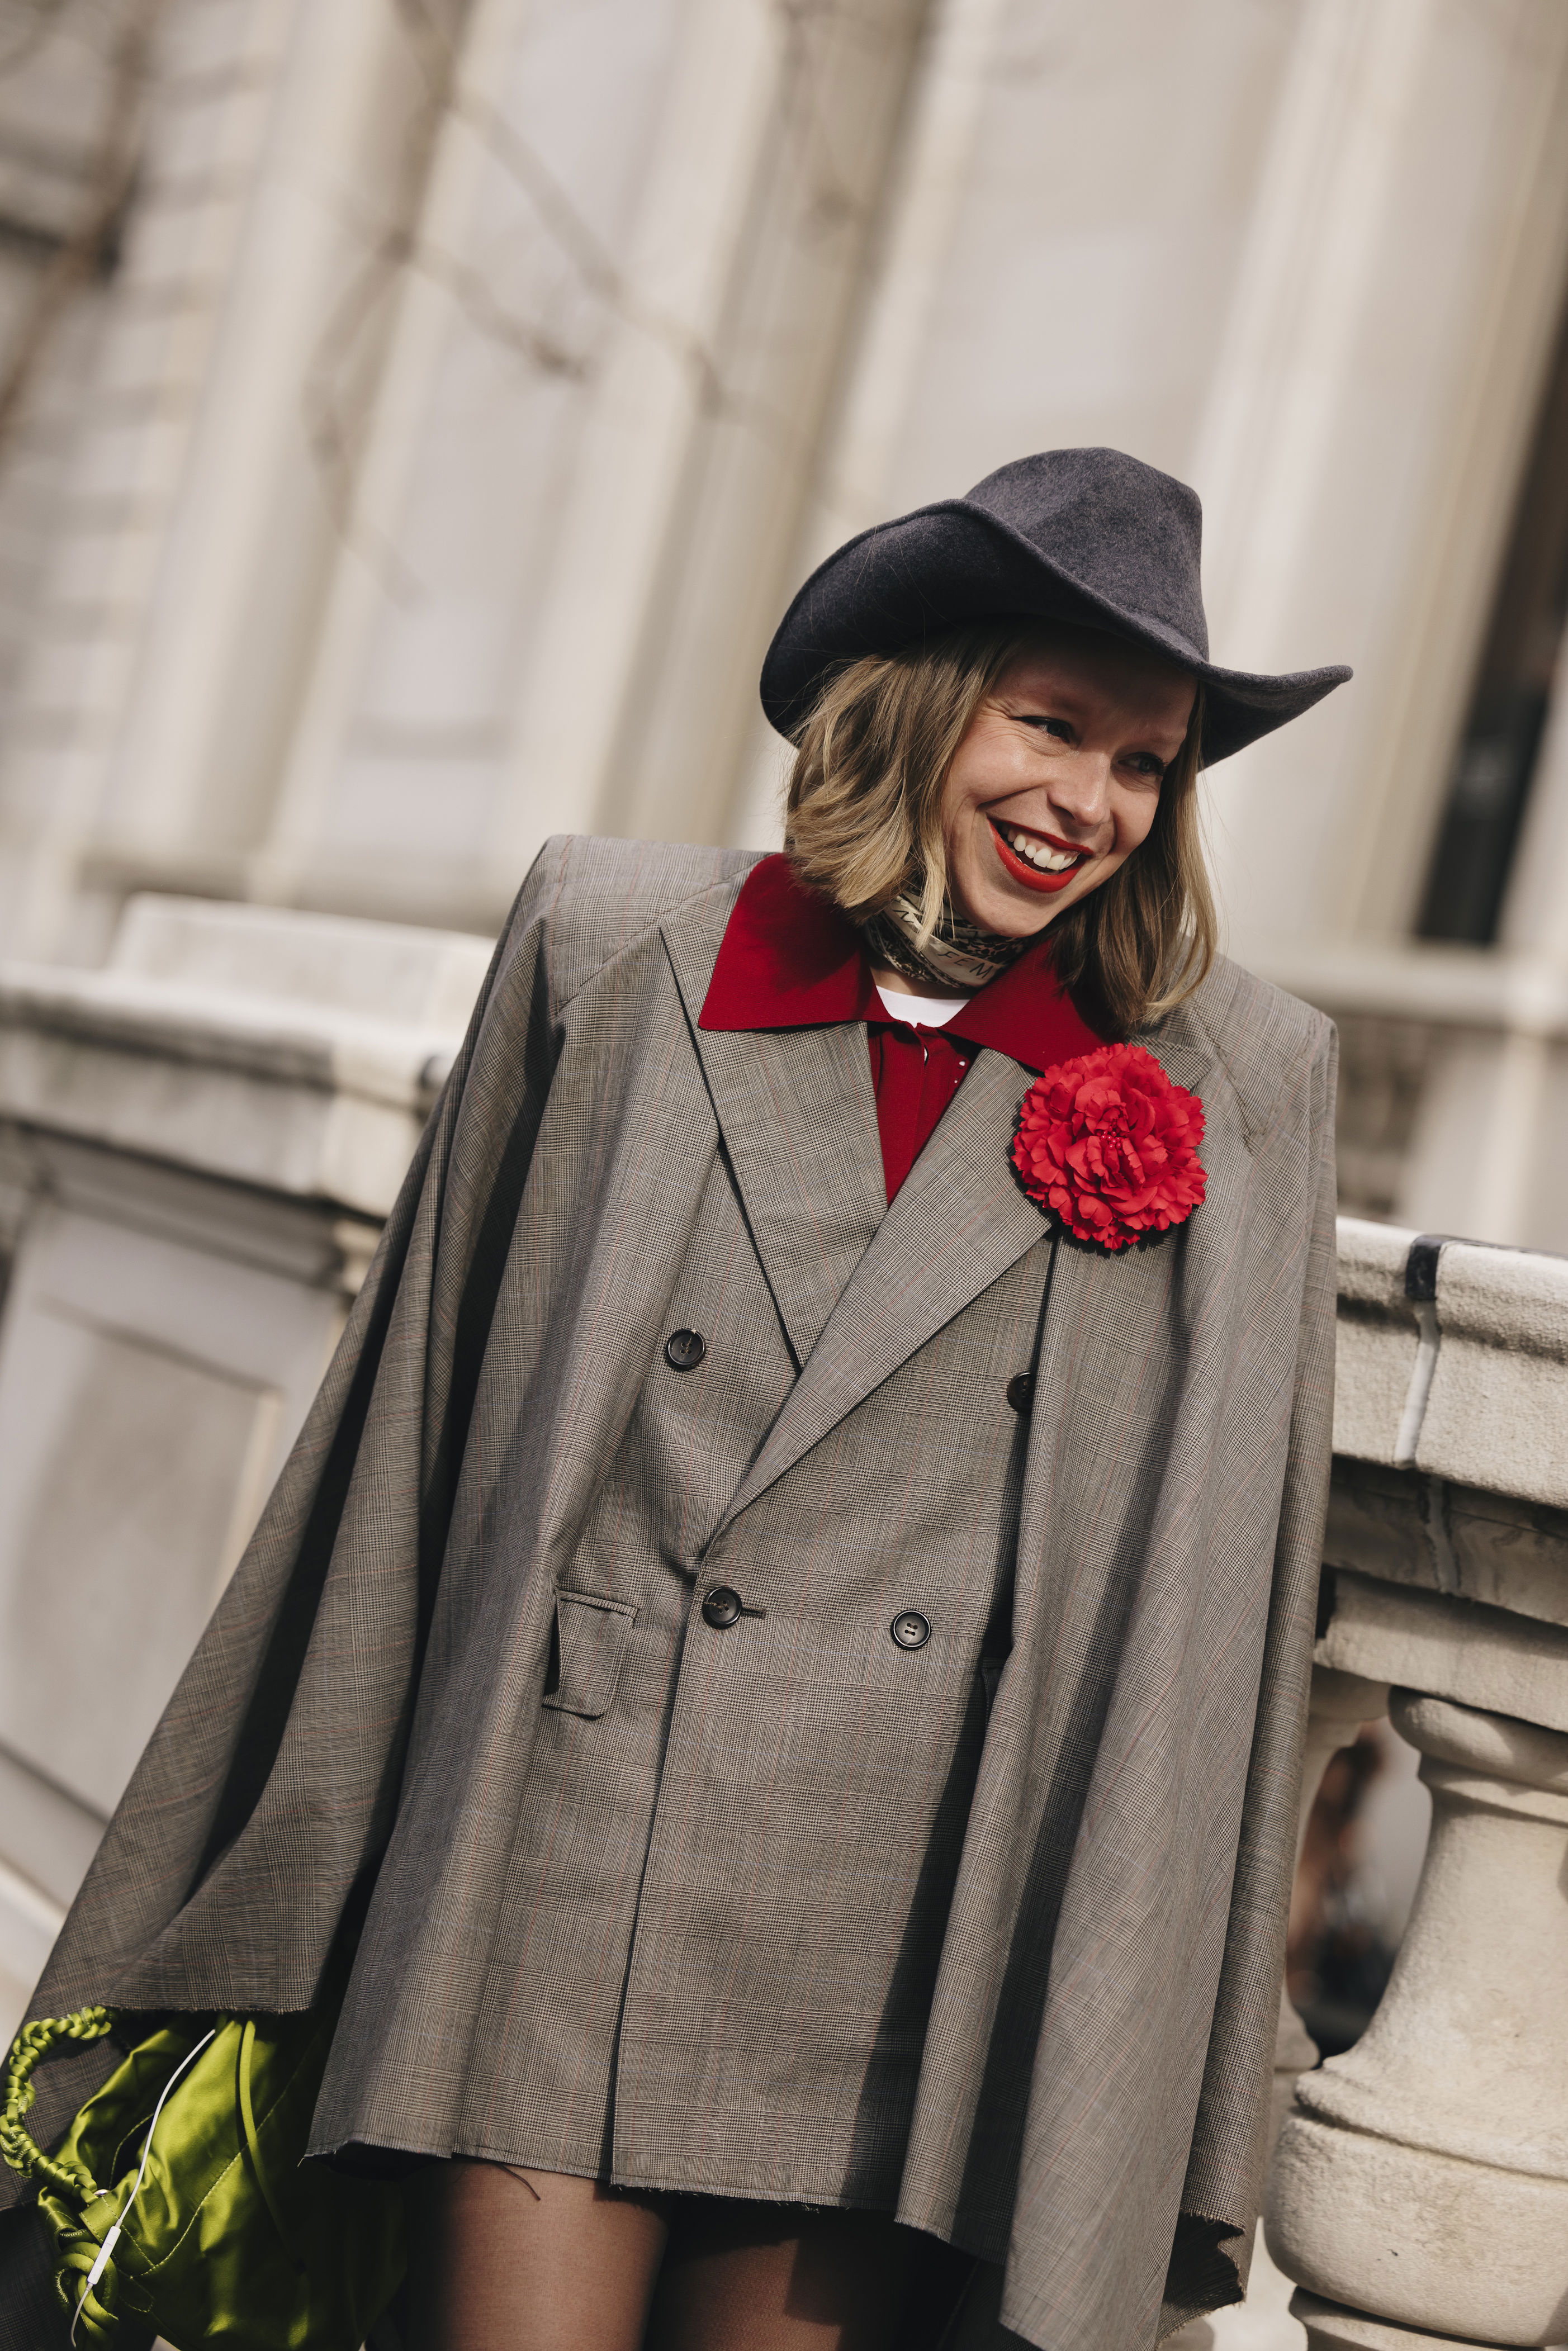 street style is bringing the antique brooch back